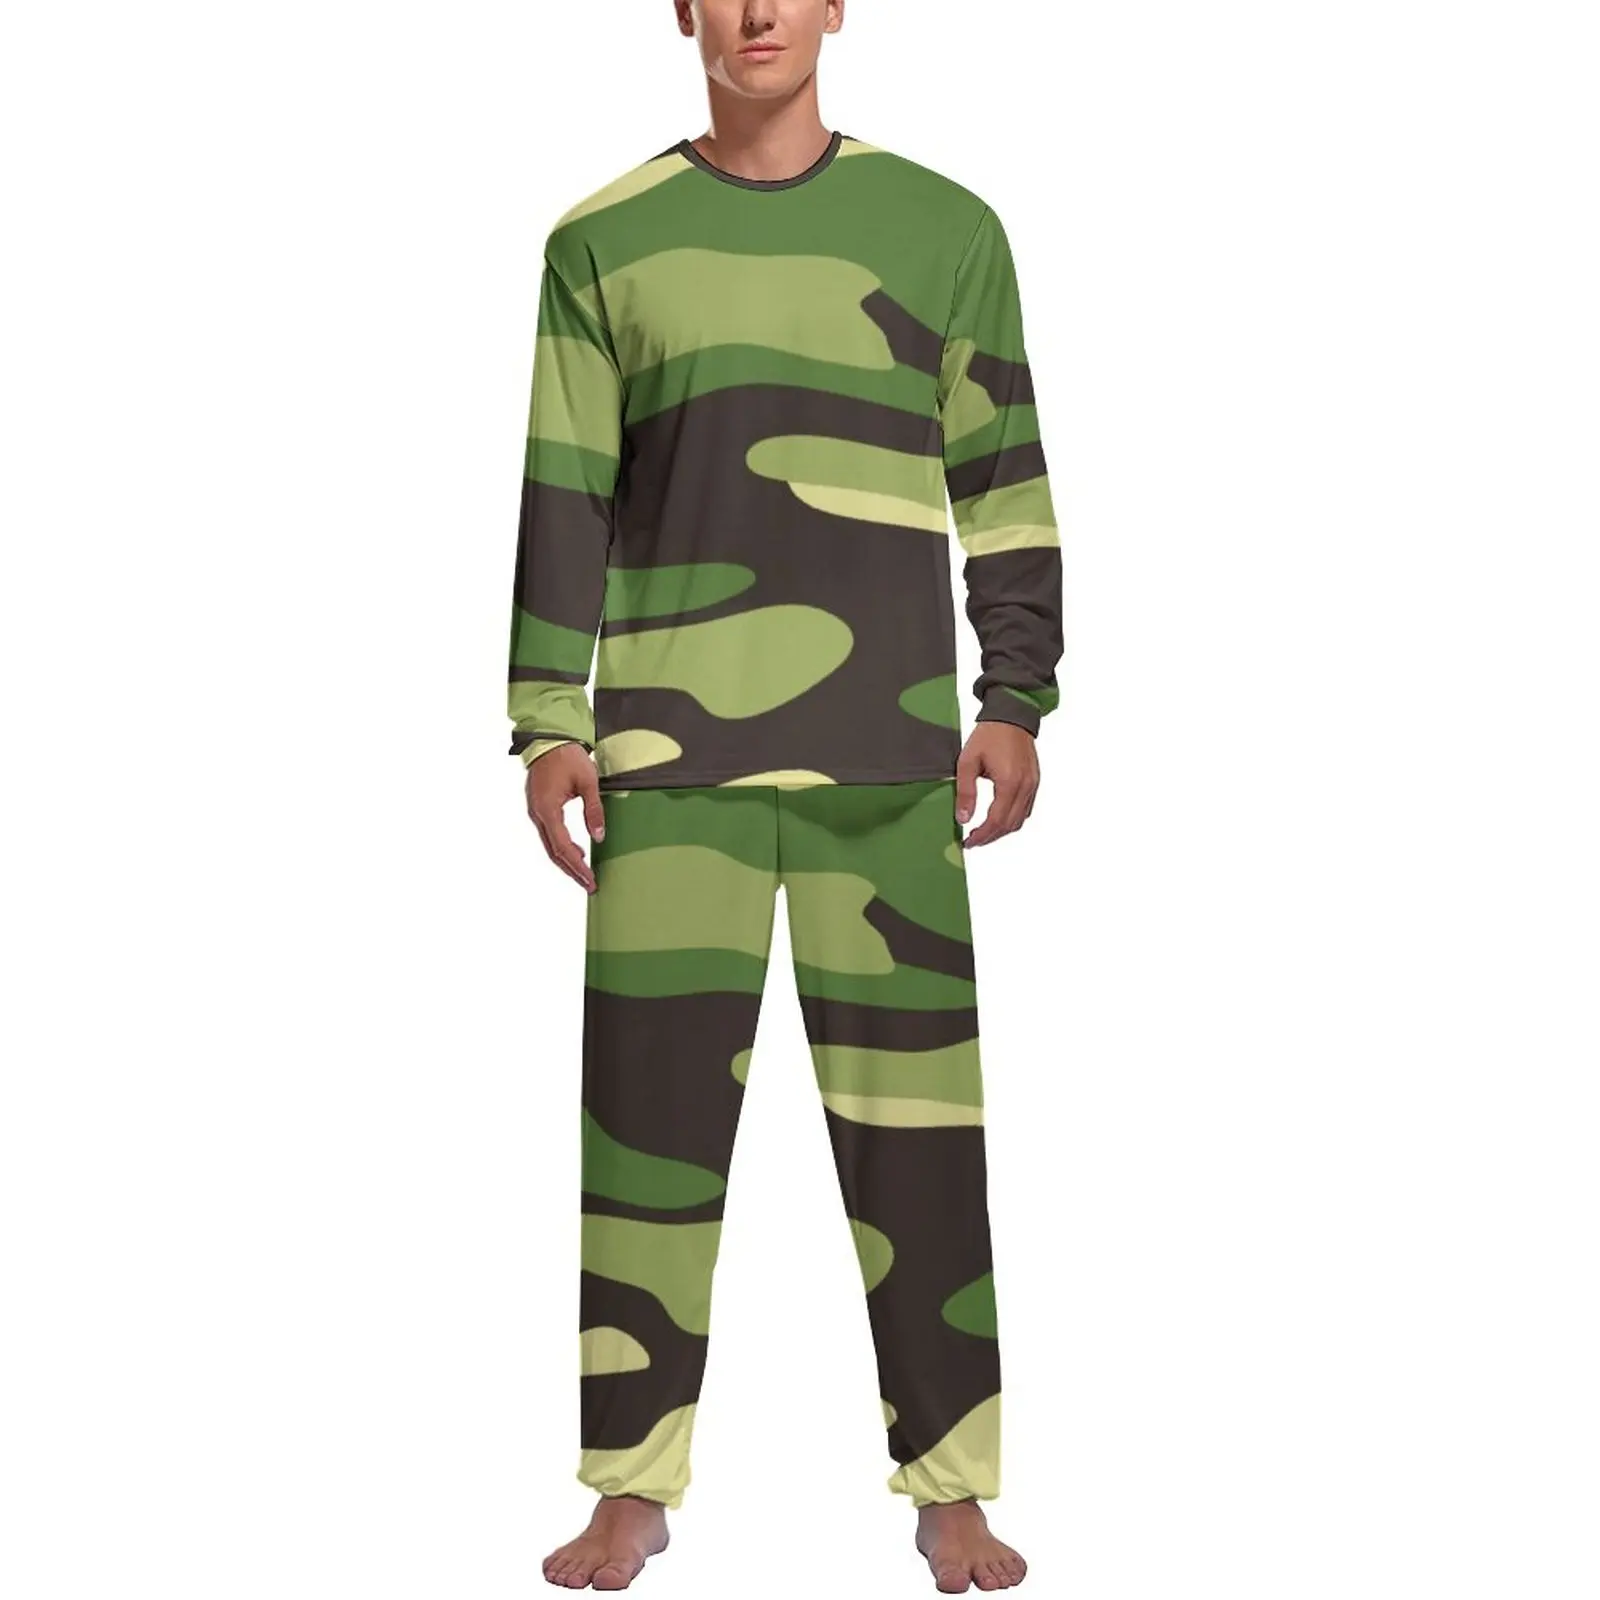 Army Camo Print Pajamas Autumn Forest Multicam Night Home Suit Man Two Piece Graphic Long-Sleeve Romantic Pajama Sets